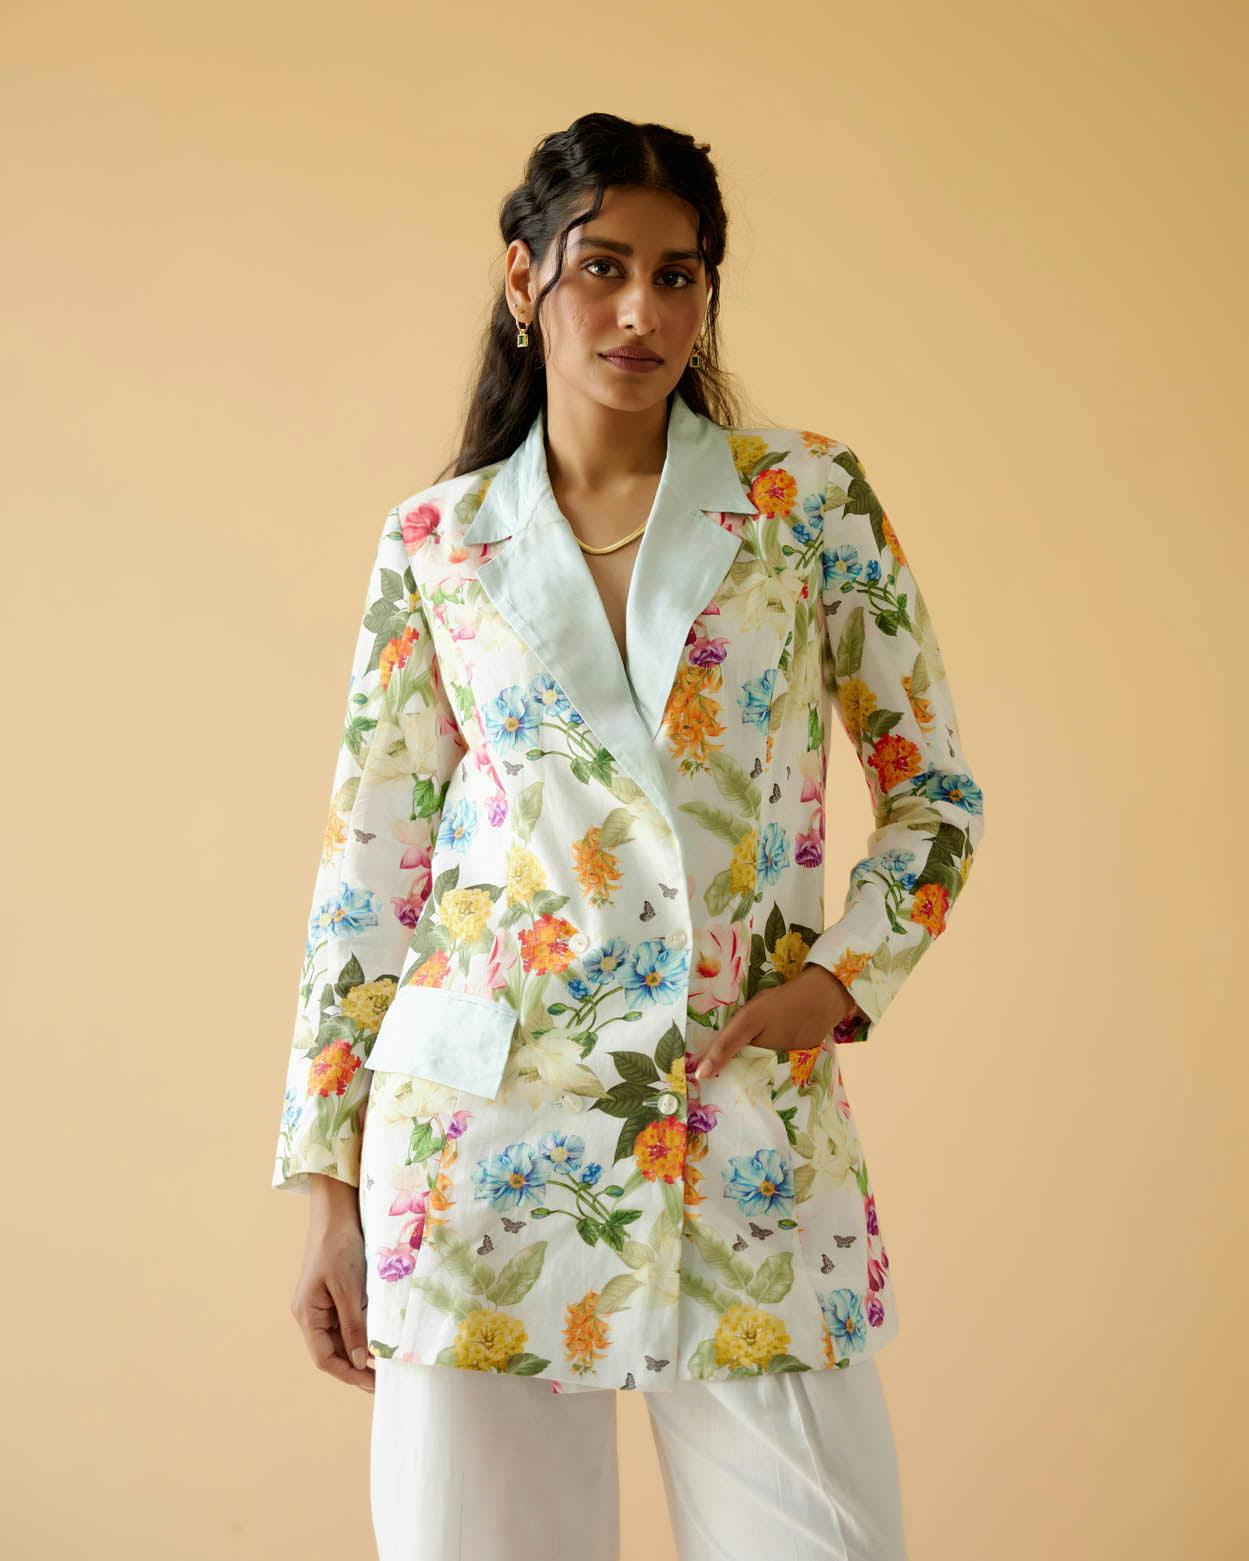 Pihu Blazer, a product by Moh India